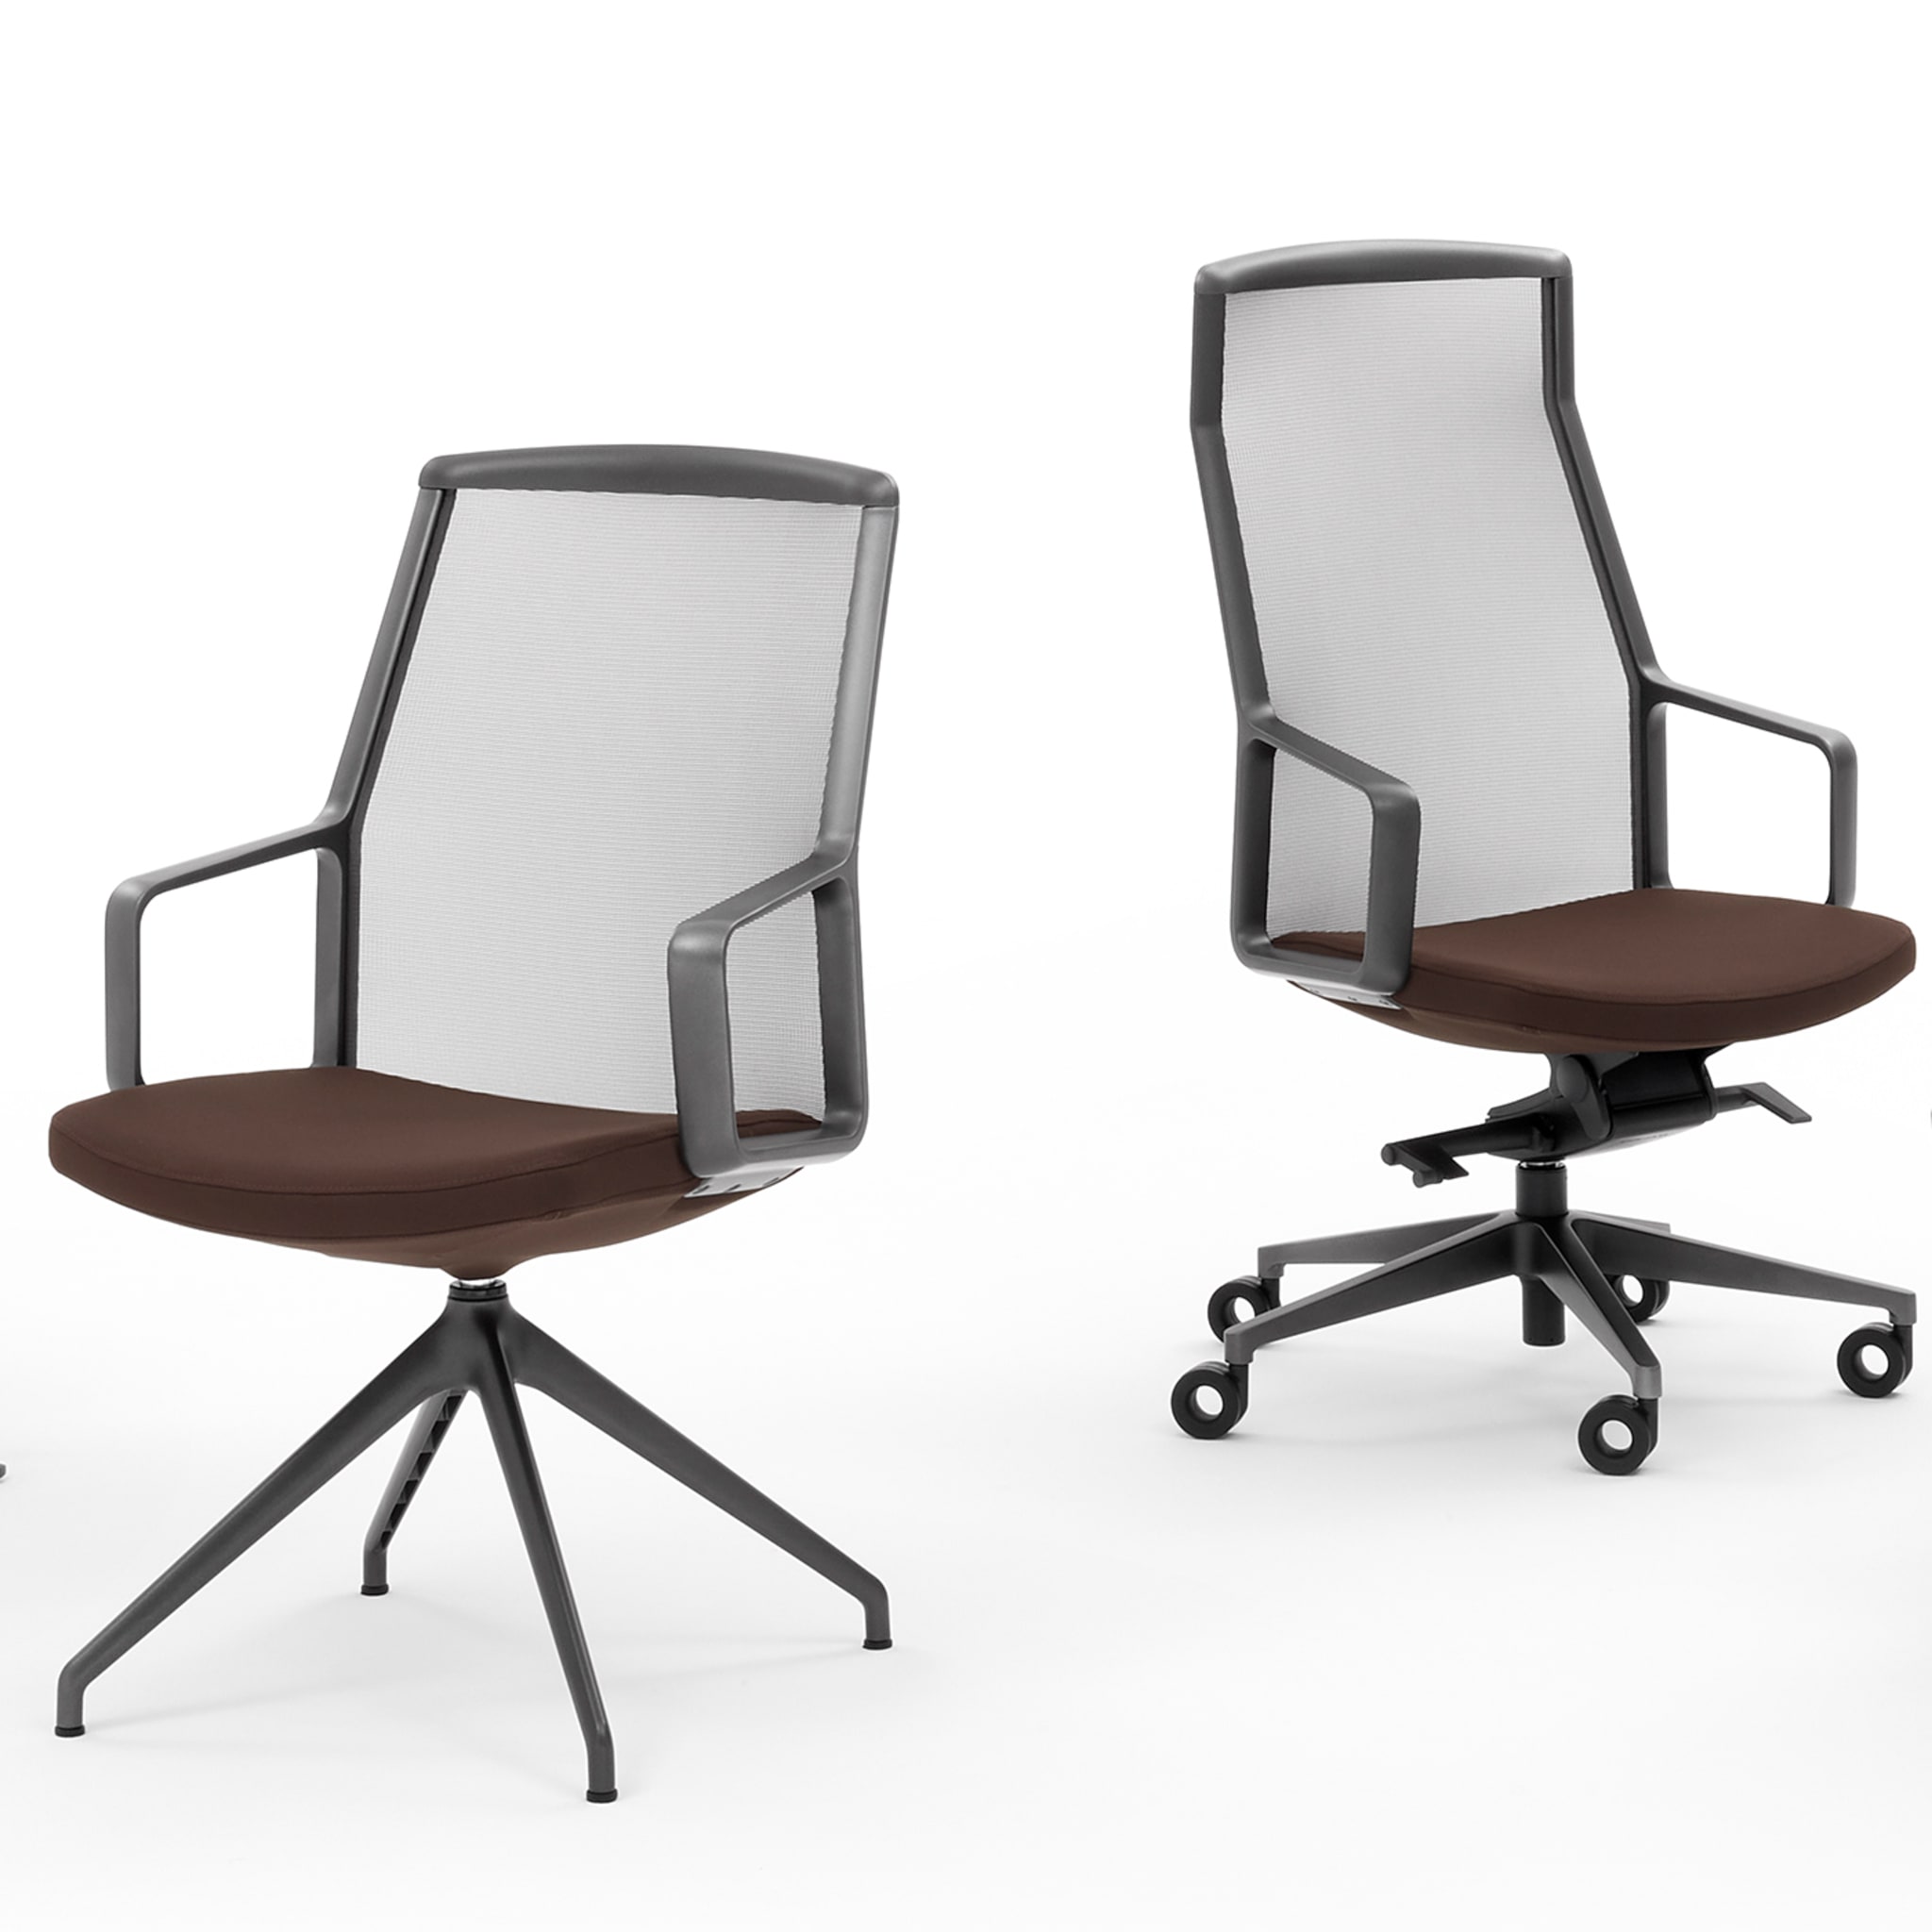 ADELE chestnut EXECUTIVE CHAIR by ORLANDINIDESIGN - Alternative view 1